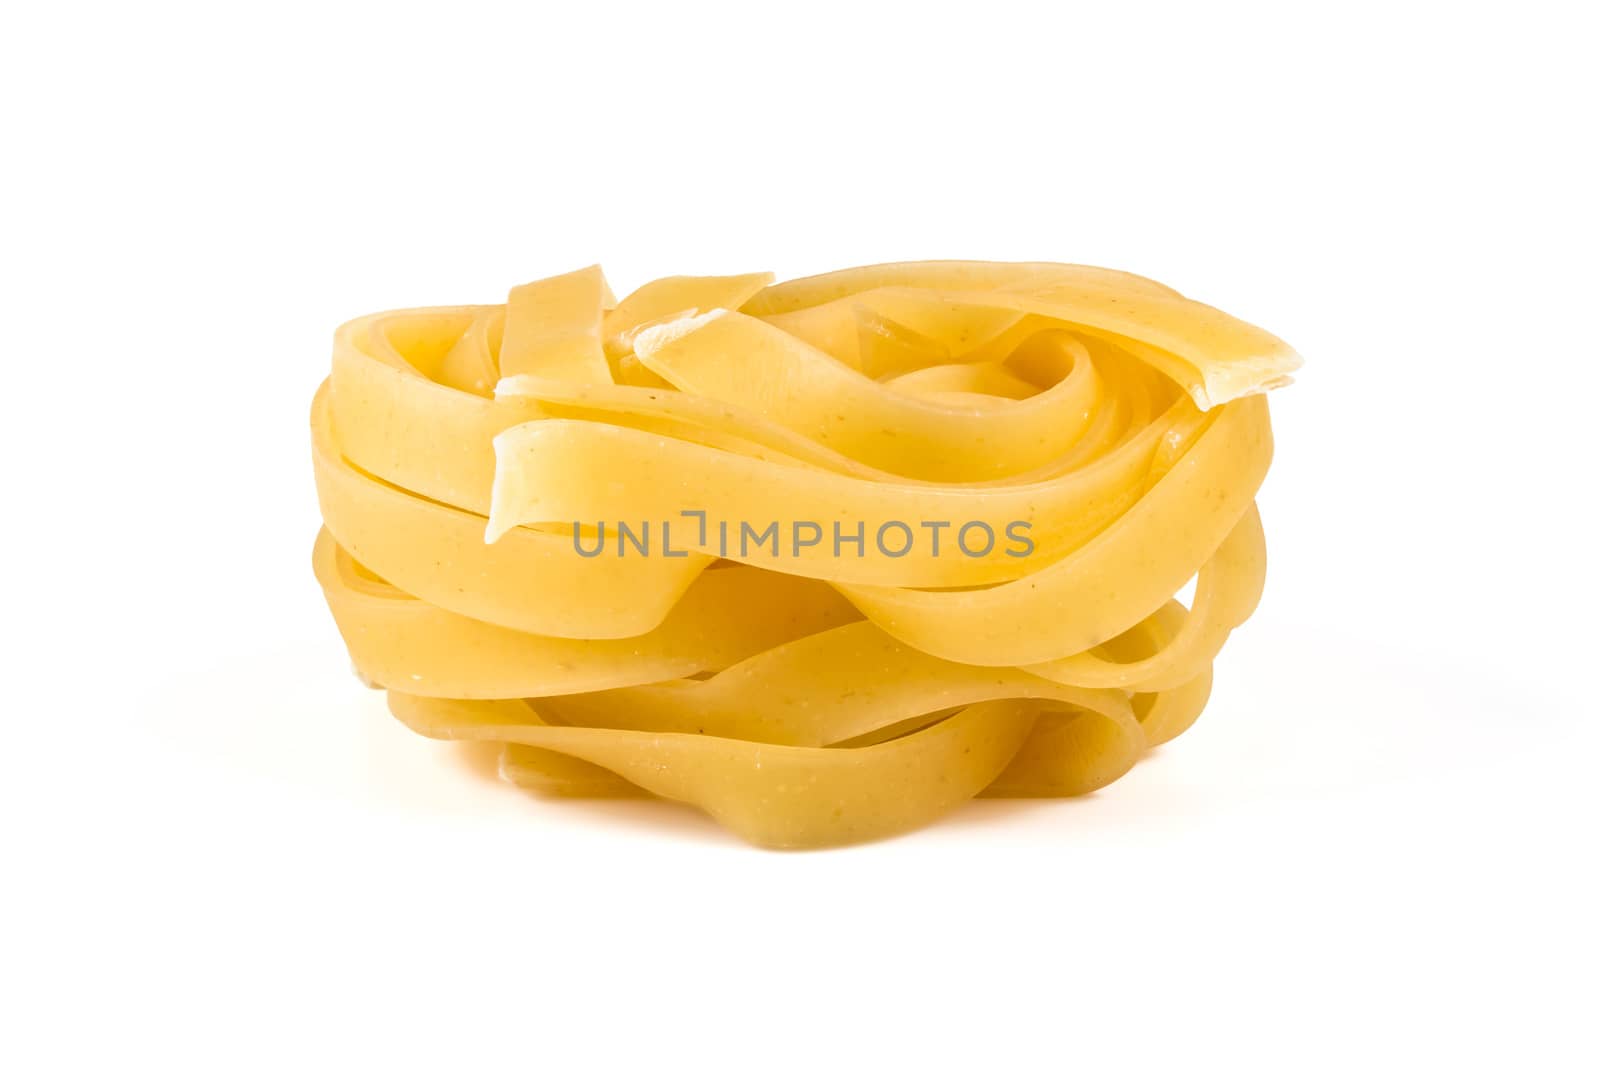 egg noodles, pasta on a white background